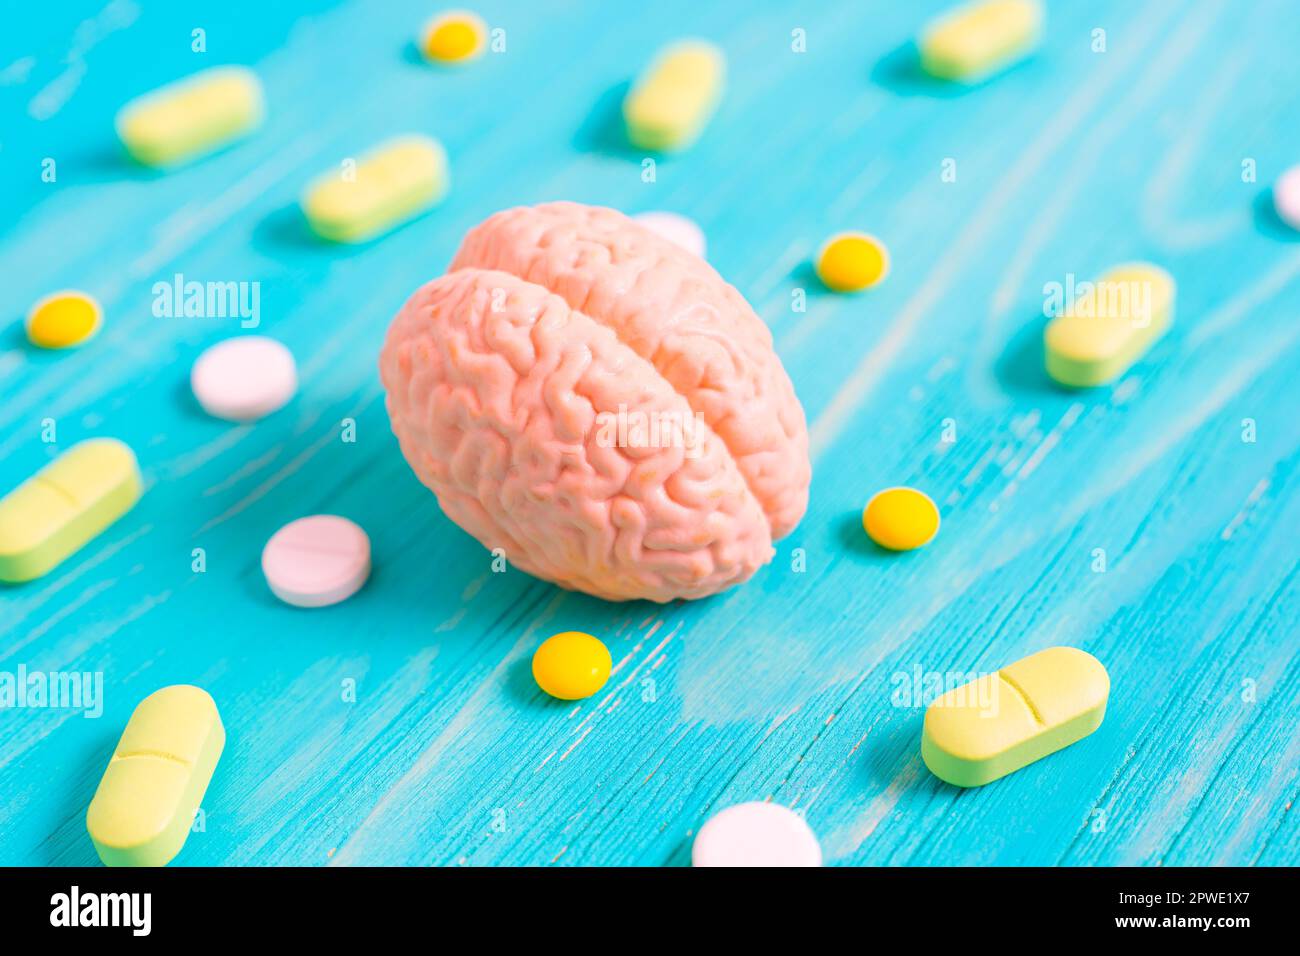 Miniature human brain model alongside scattered yellow and white pills on a blue wooden table. Brain function, medication, treatment and preserving co Stock Photo